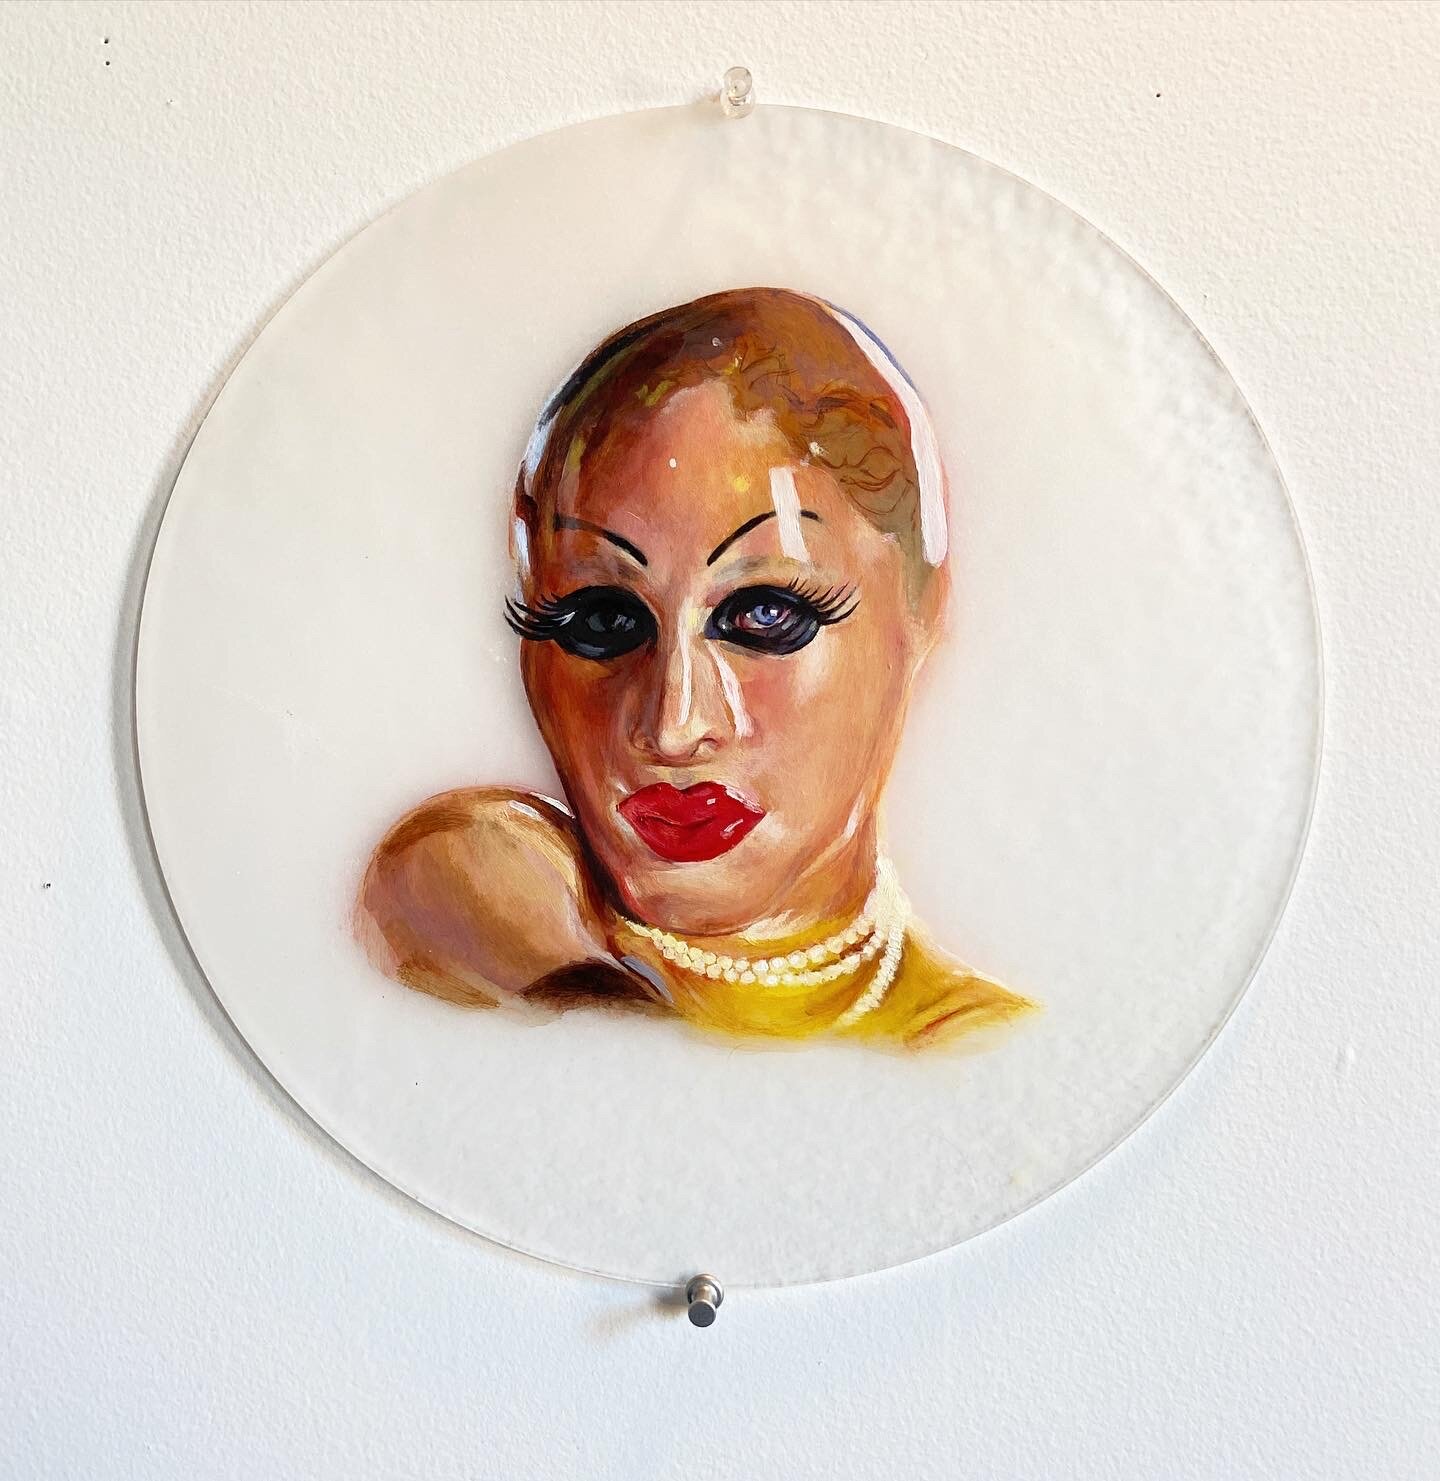  Doll 1, 2020, Oil on plexi with frost finish, 10” x 10”  